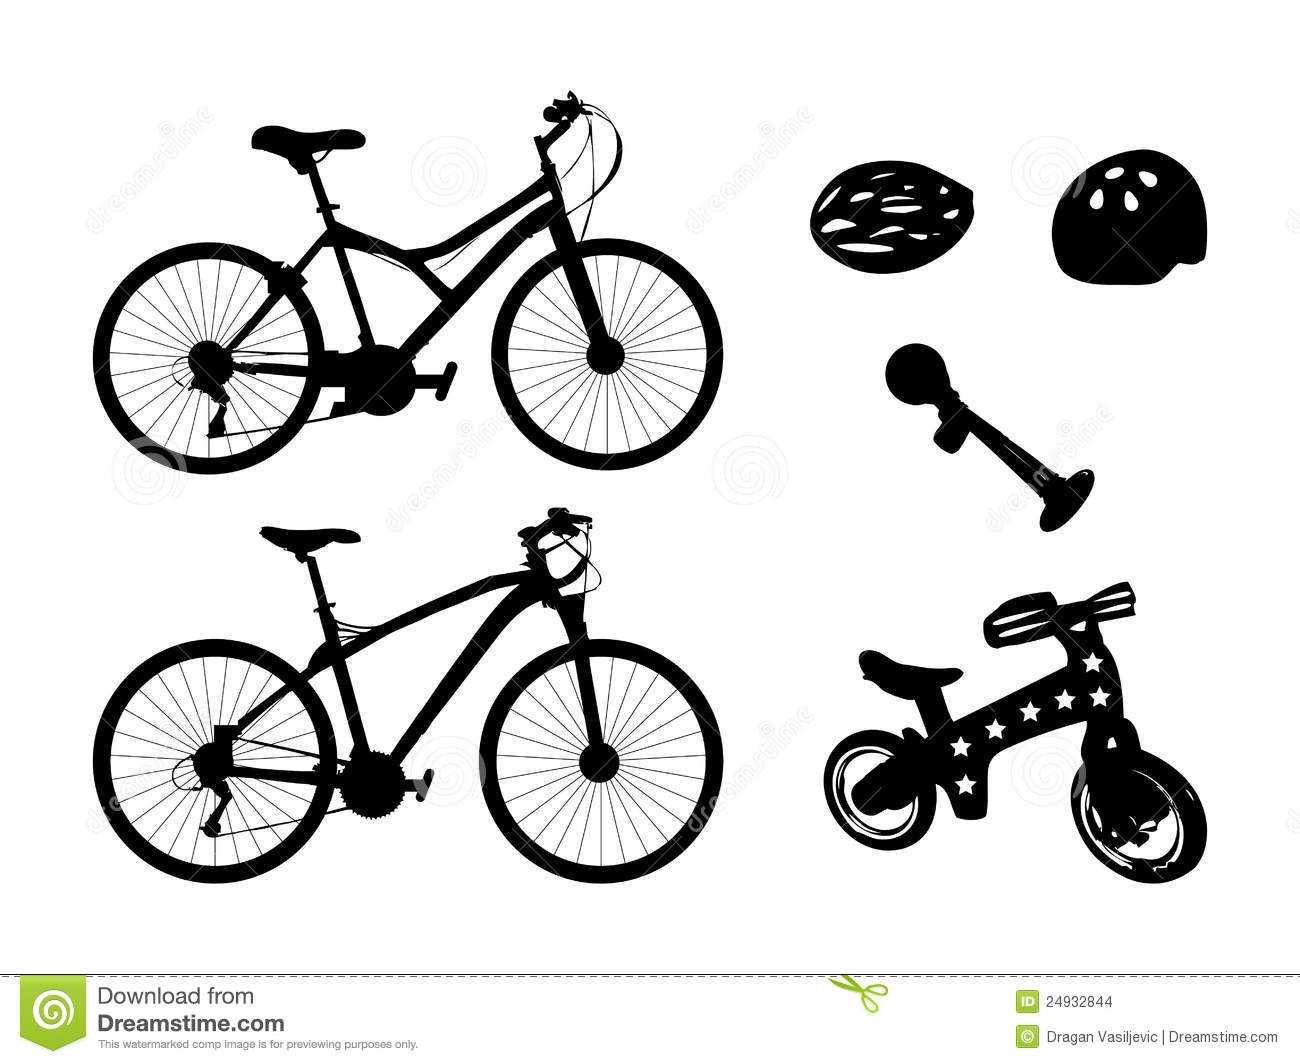 Bicycle Silhouette Vectors